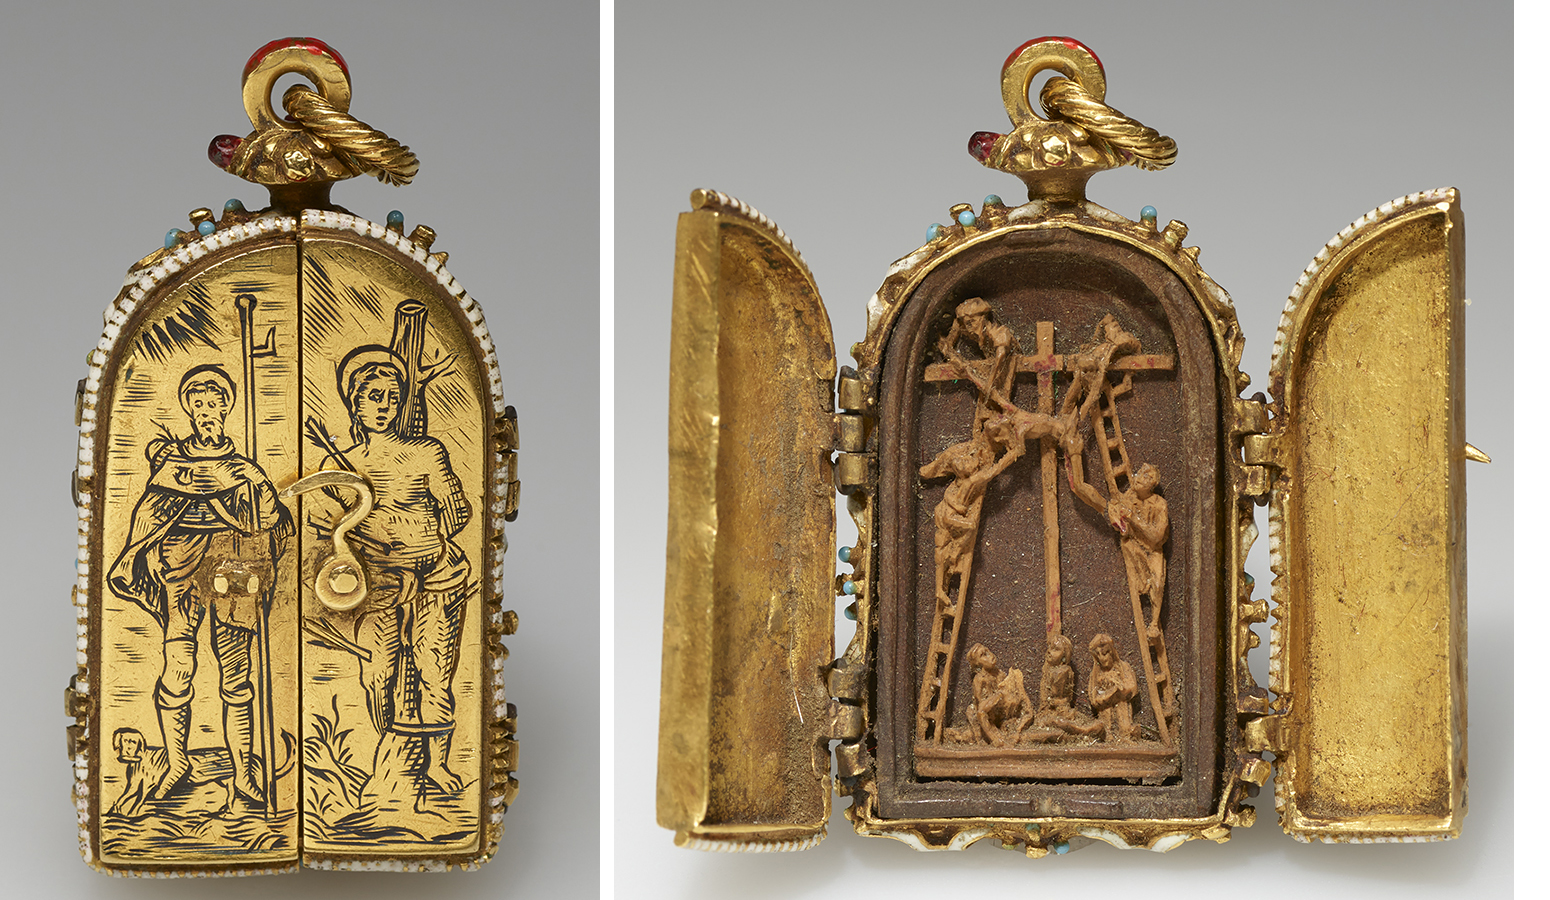 A tiny gold pendant that opens to reveal Christ’s dead body being taken down from the cross. The exterior depicts two popular saints, Saint Roch and Saint Sebastian.